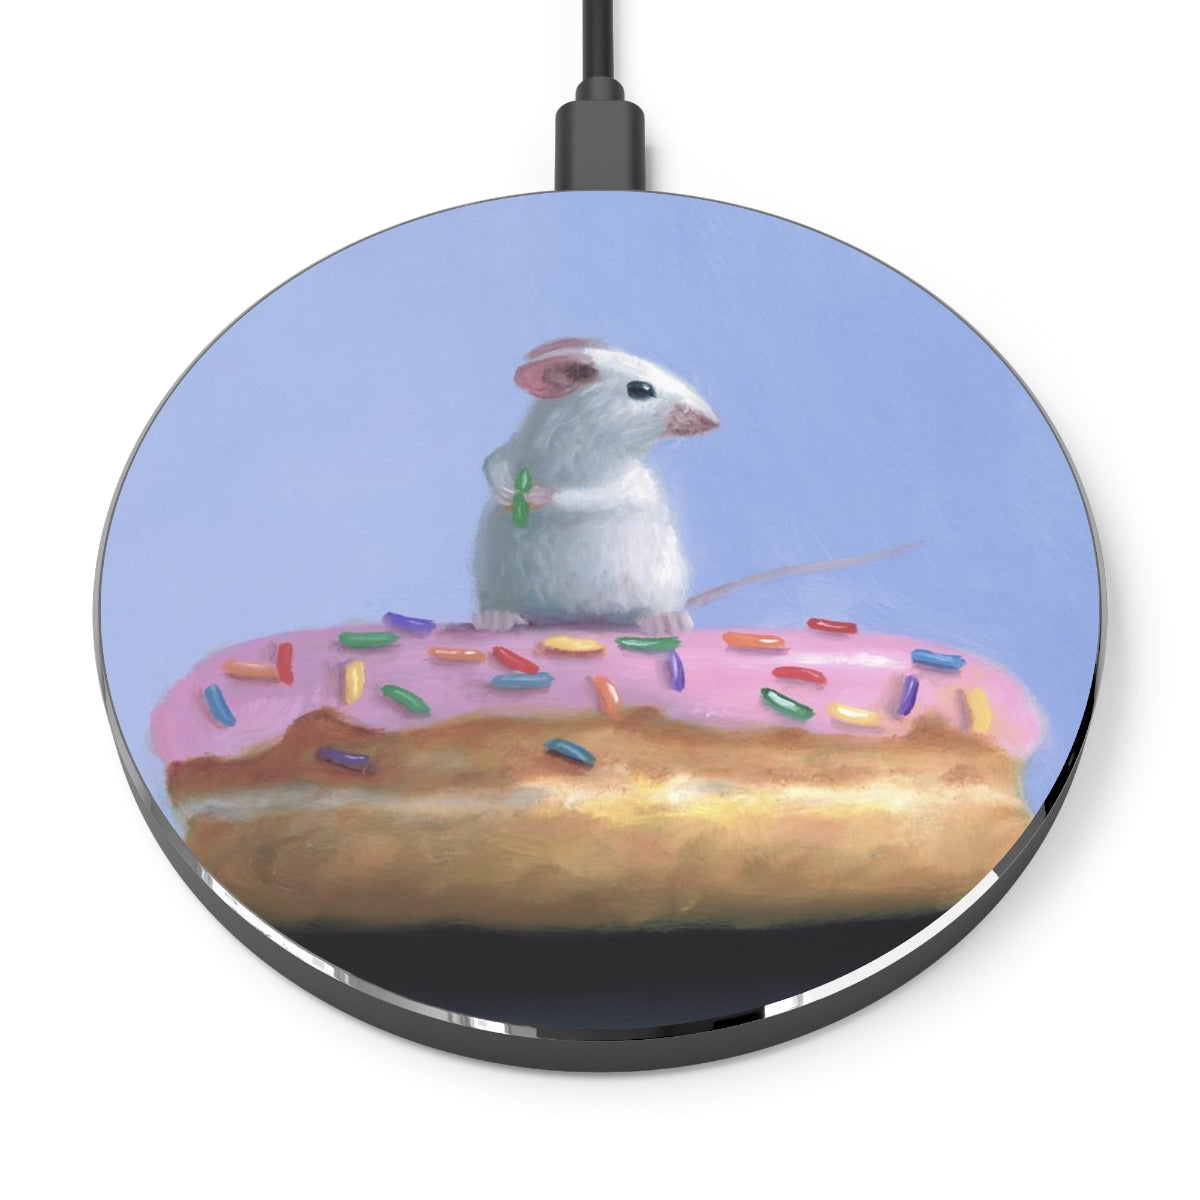 Stuart Dunkel: "Conquered Donut" Wireless Charger